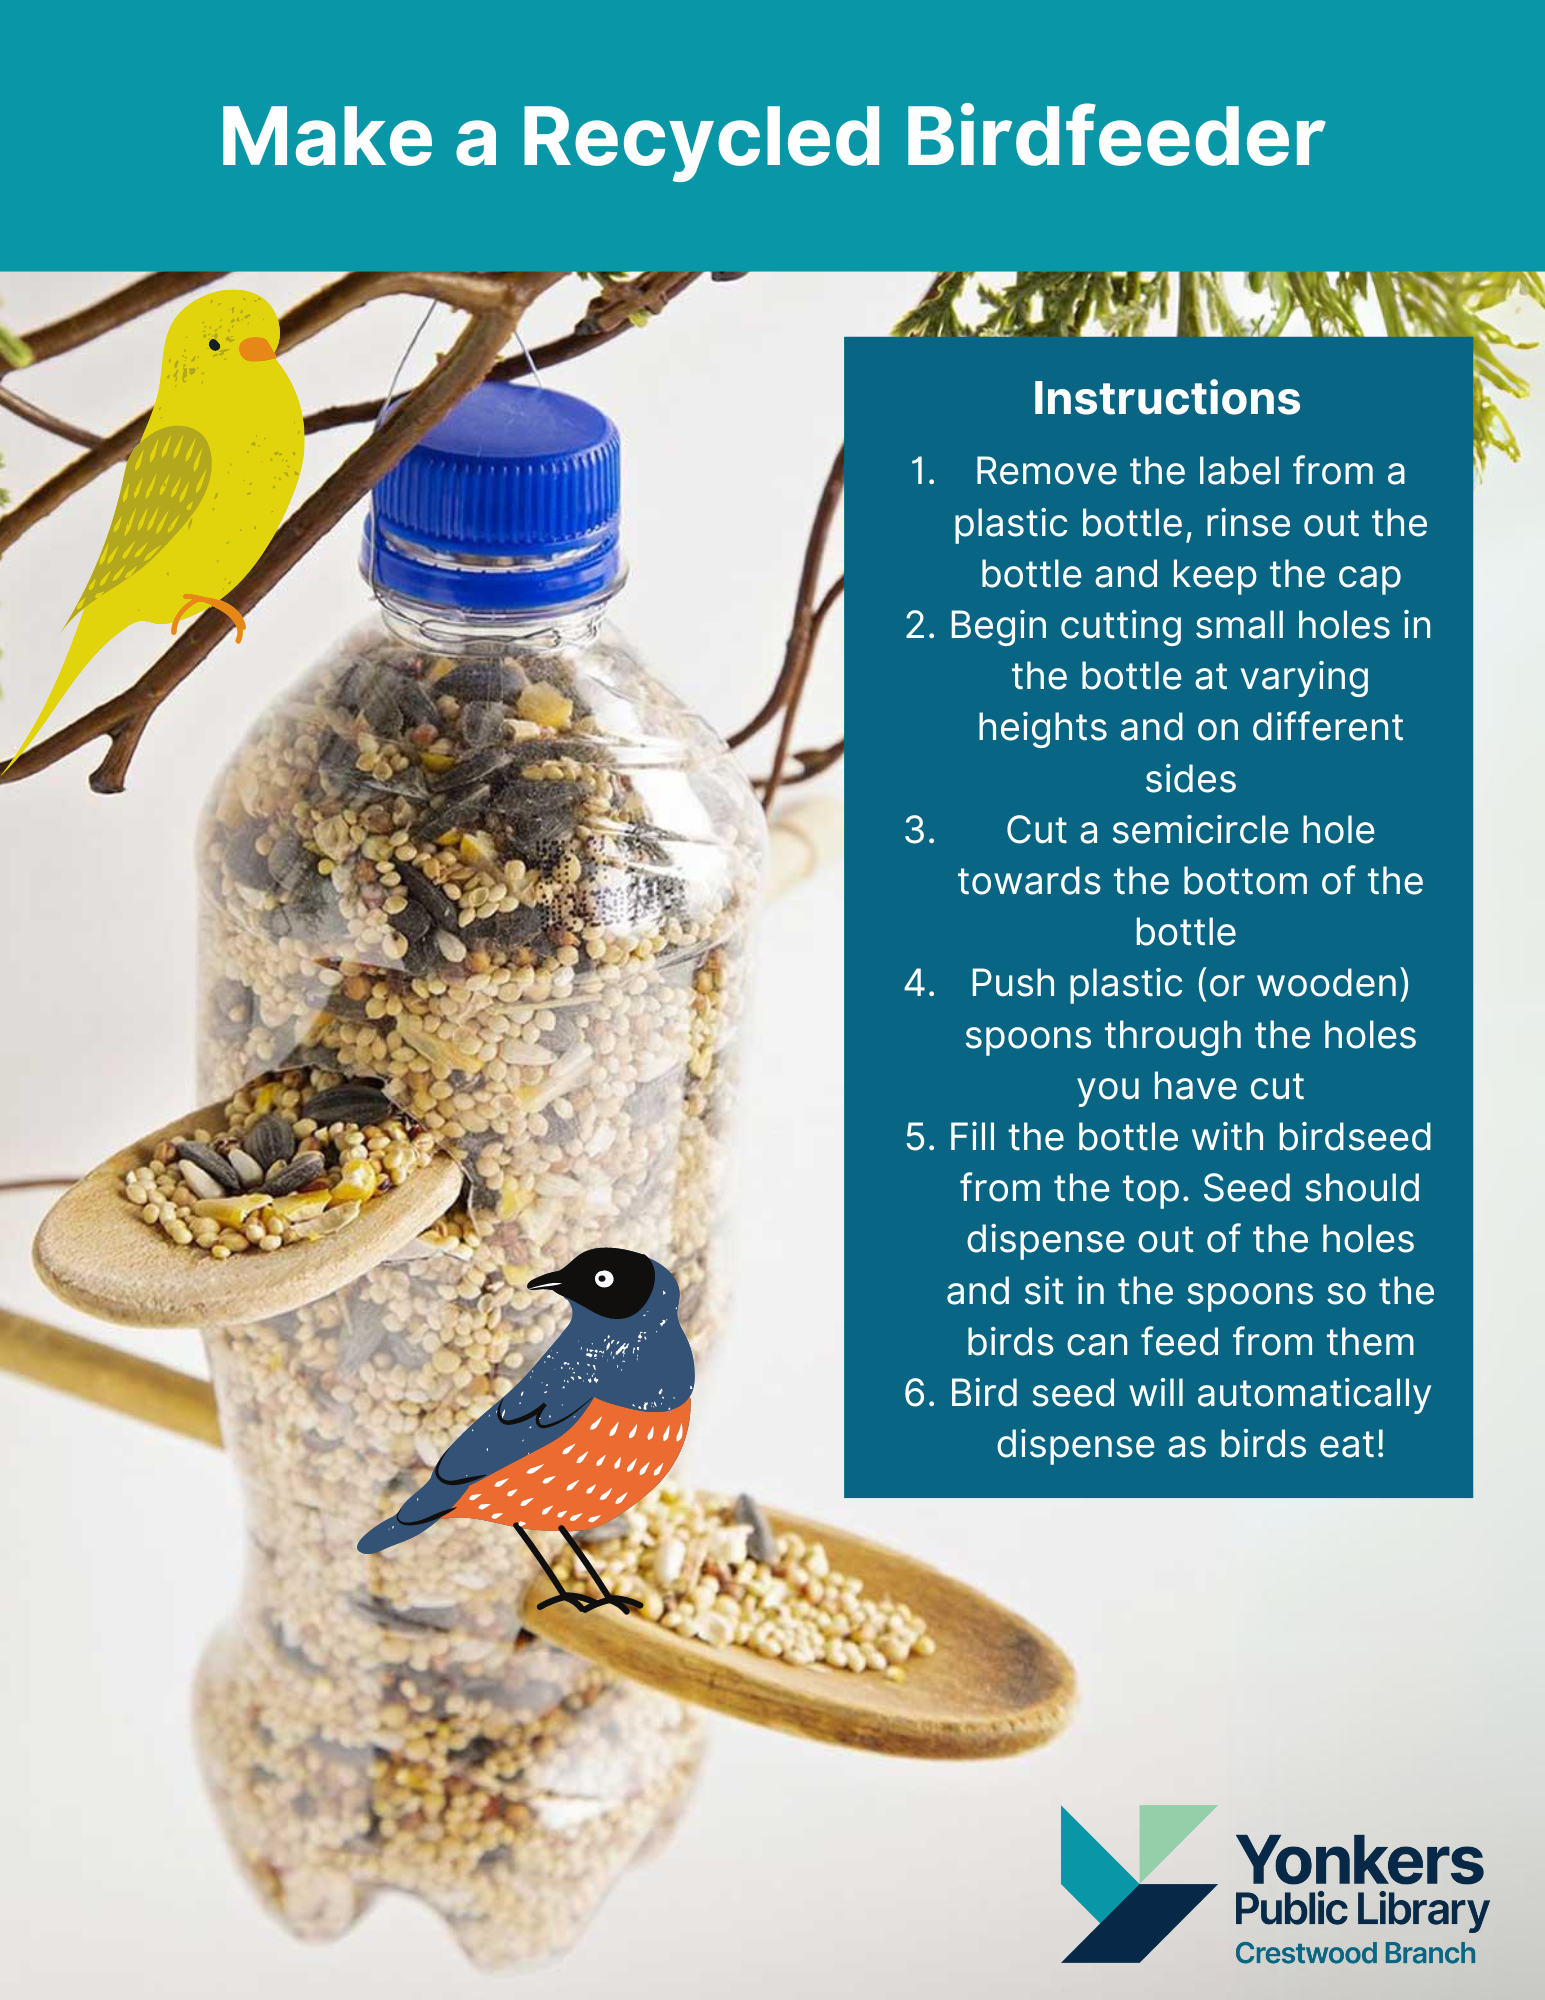 A visual guide on how to make a recycled bird feeder using a plastic water bottle and spoons.